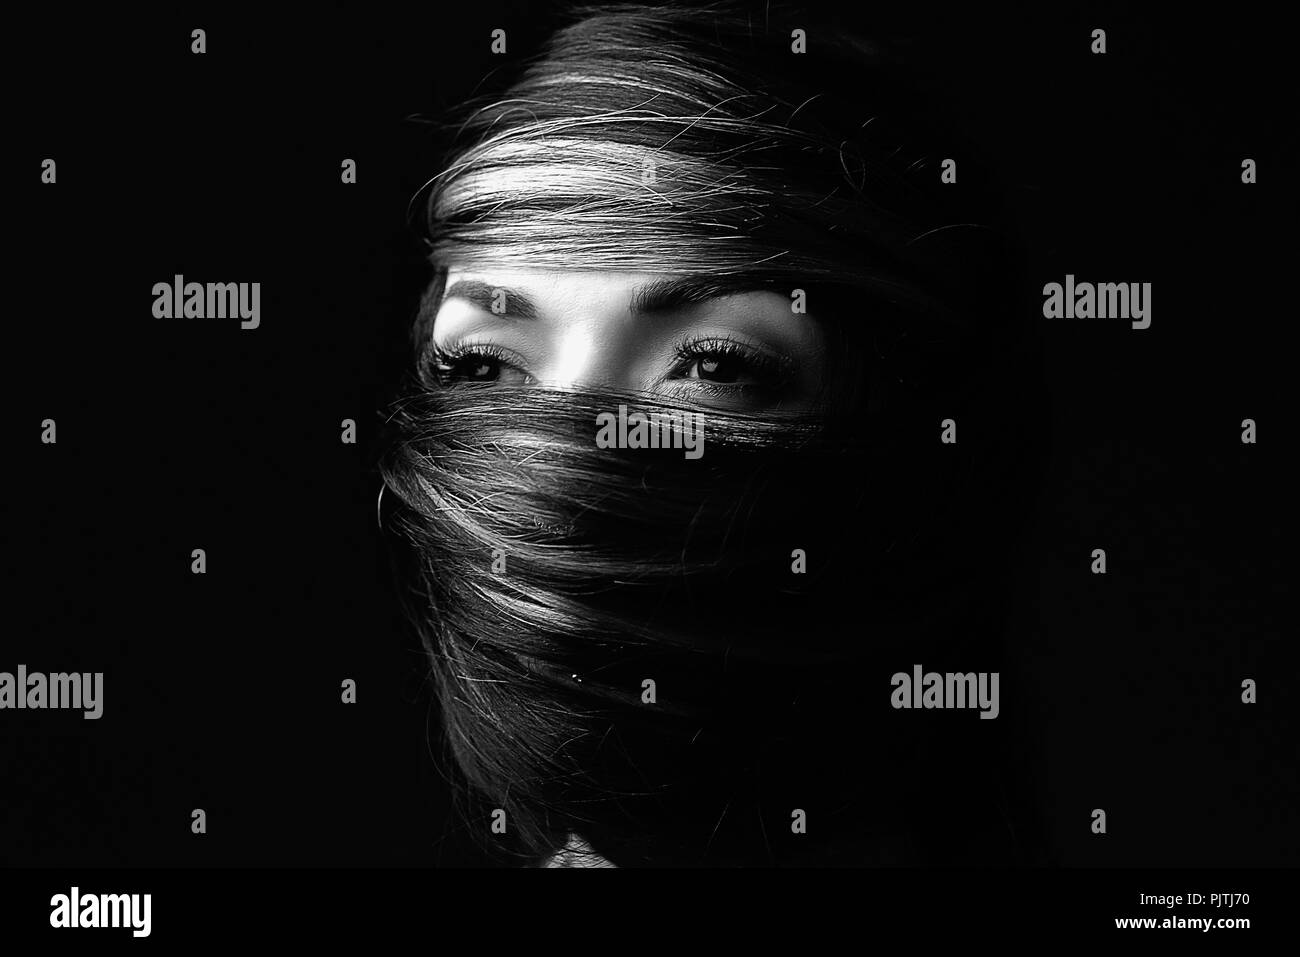 Portrait of a woman's face wrapped in her own hair Stock Photo